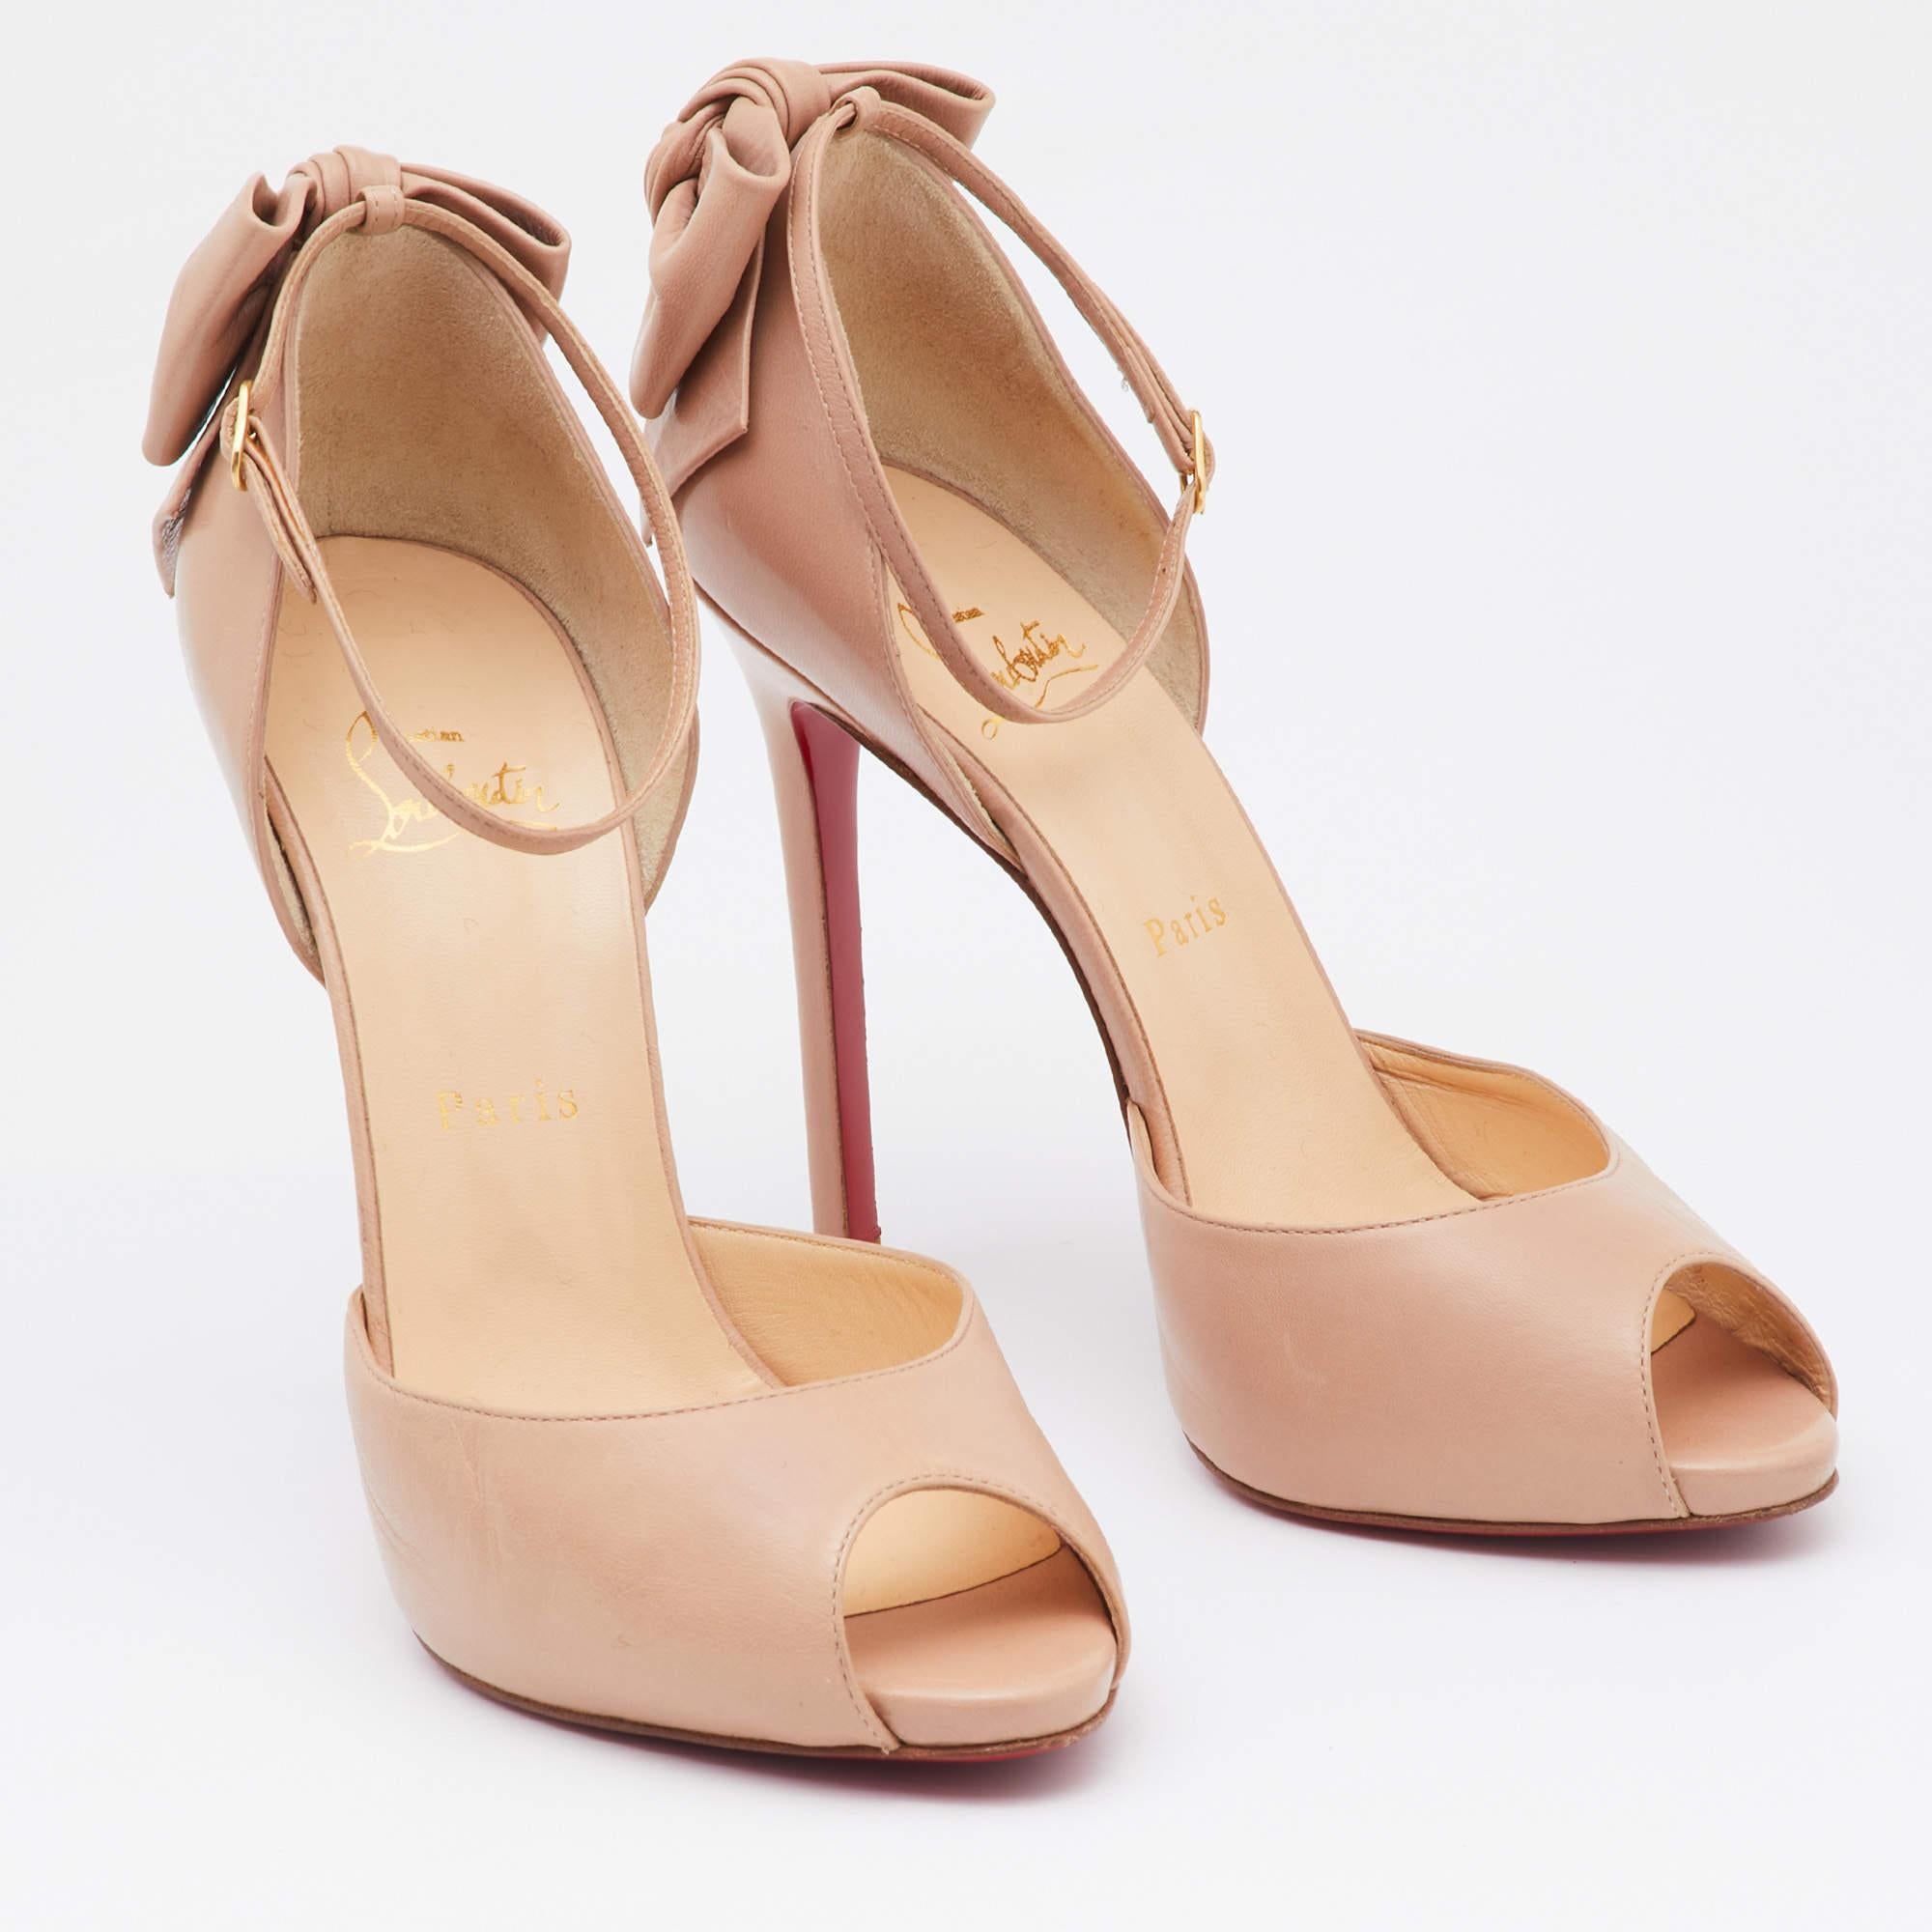 Christian Louboutin Beige Leather Dos Noeud Bow Ankle Strap Pumps Size 39 2